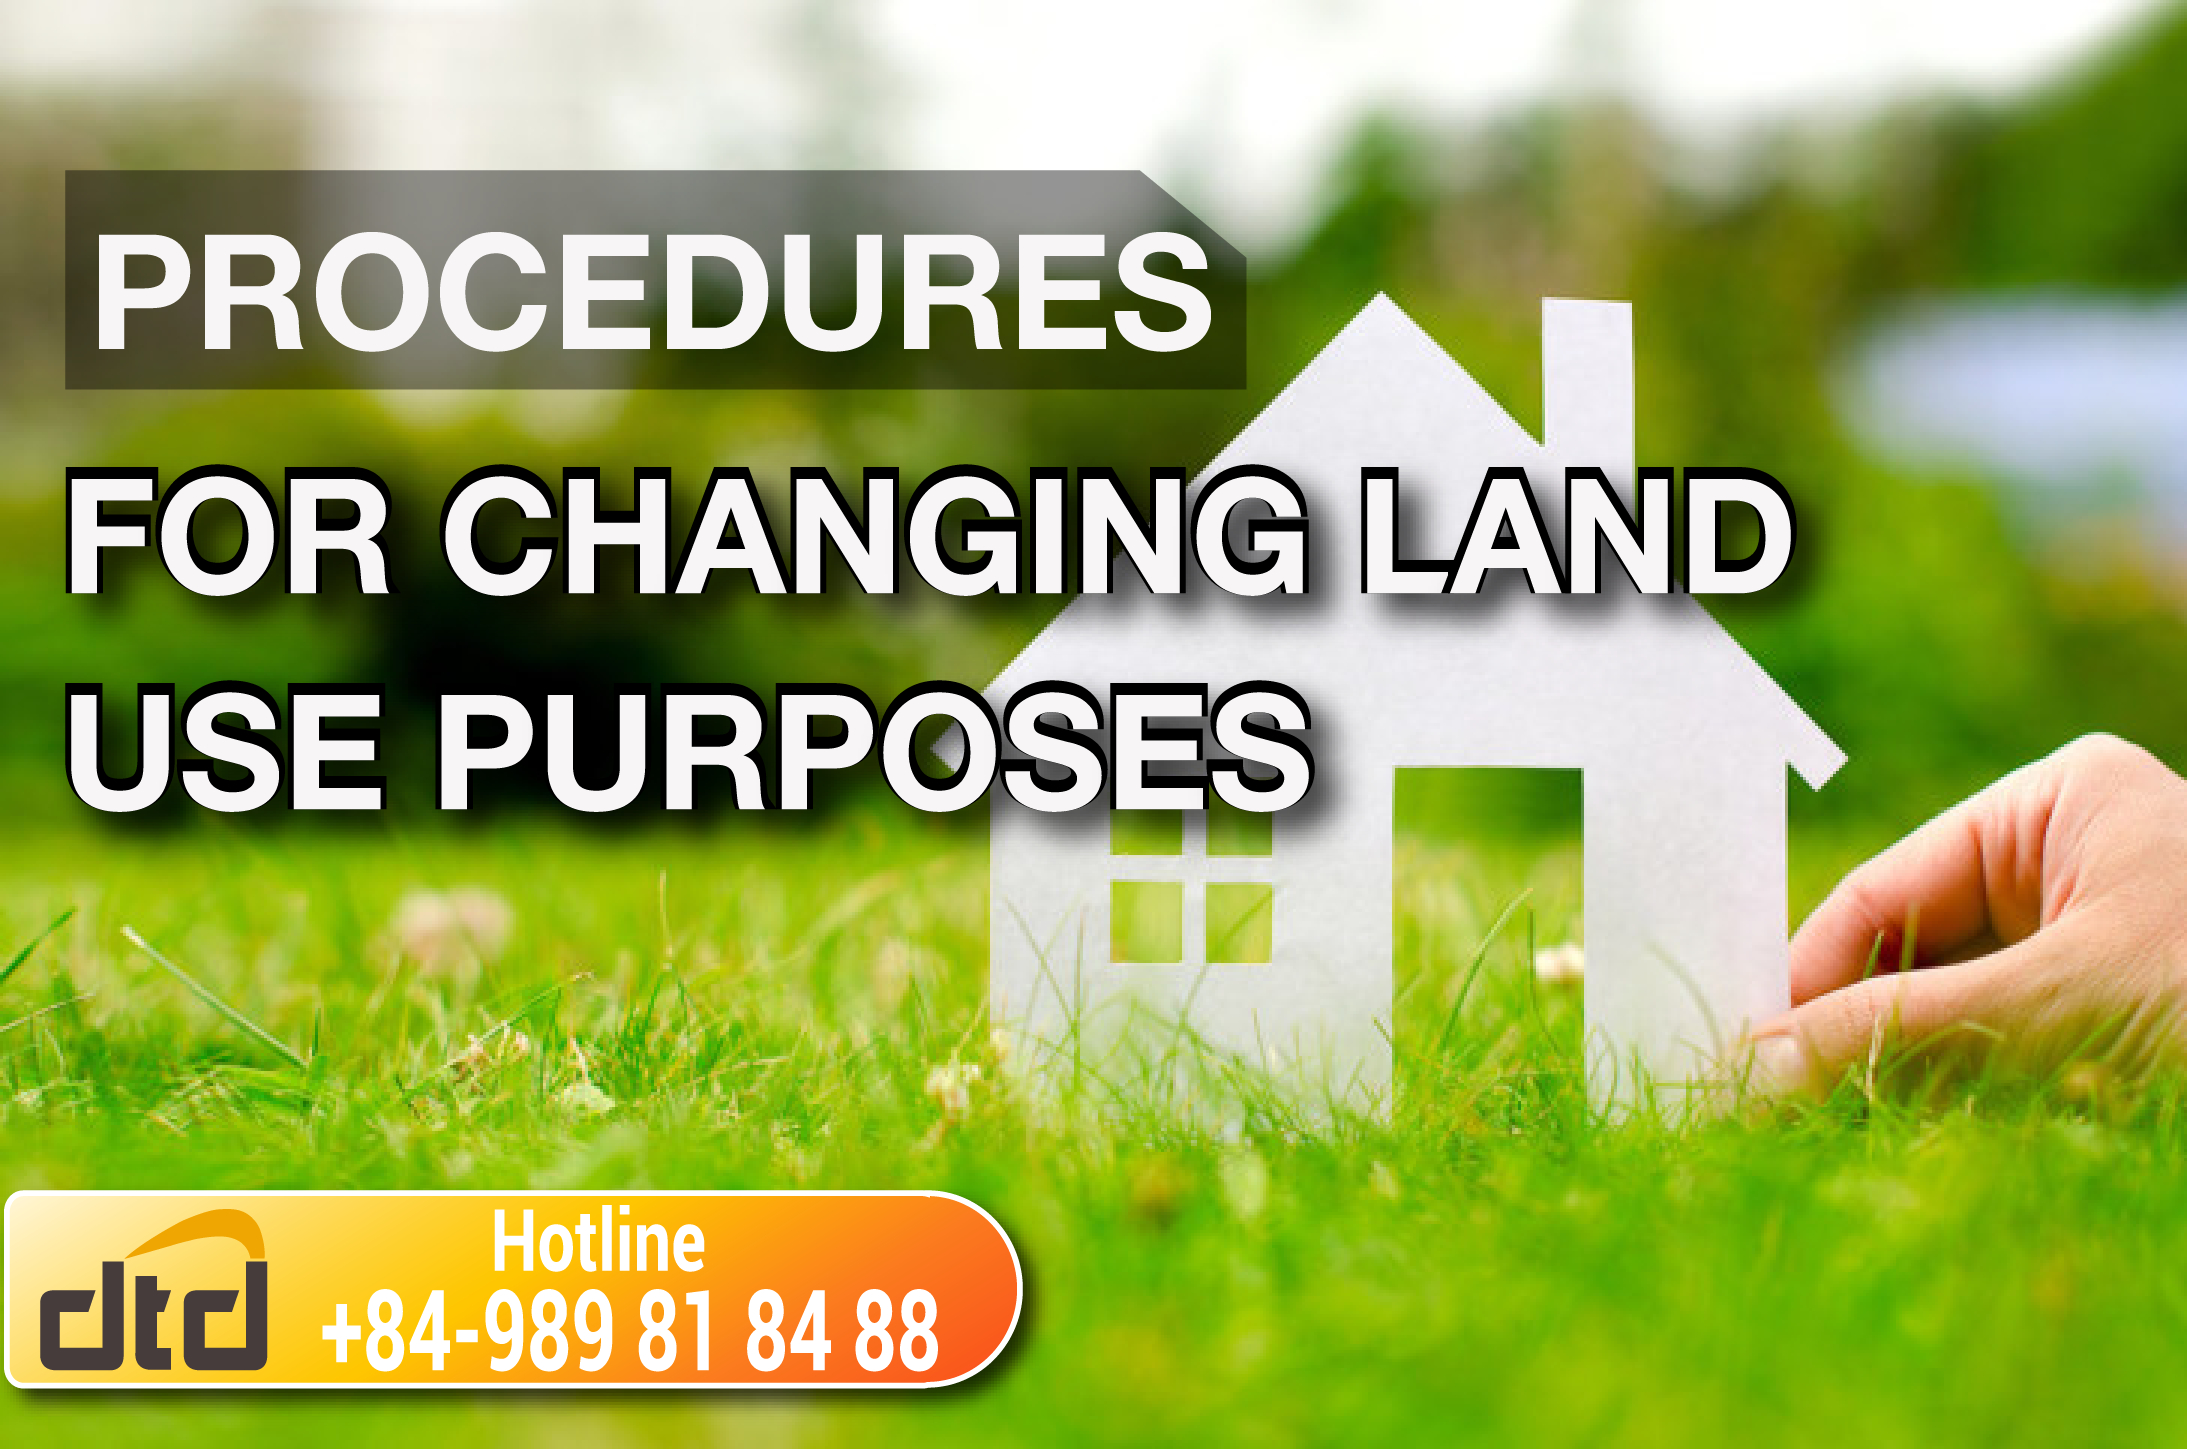 Procedures for changing land use purposes